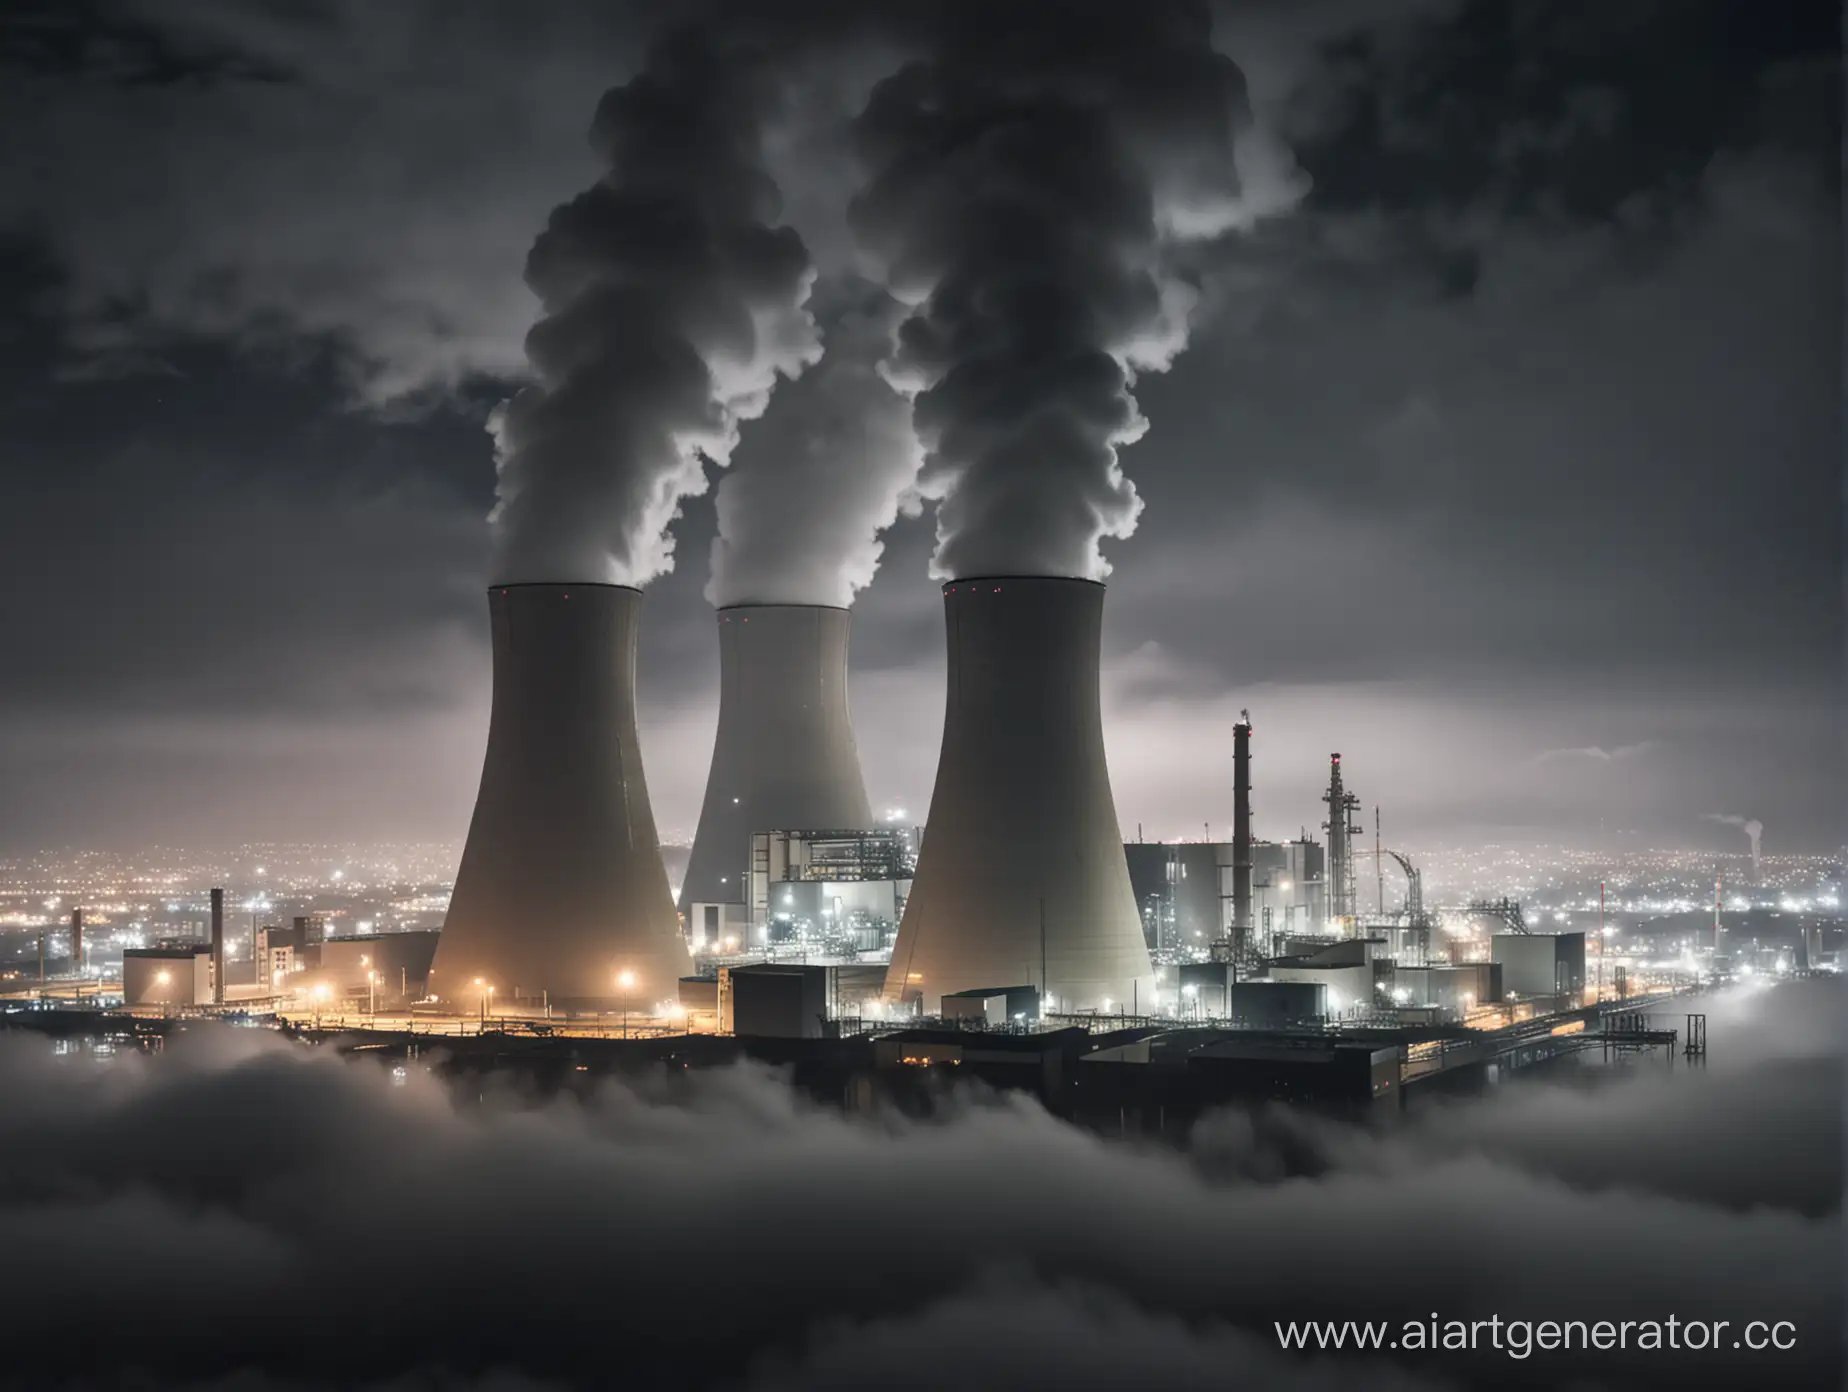 a nuclear power plant in a night city with thick clouds and fog